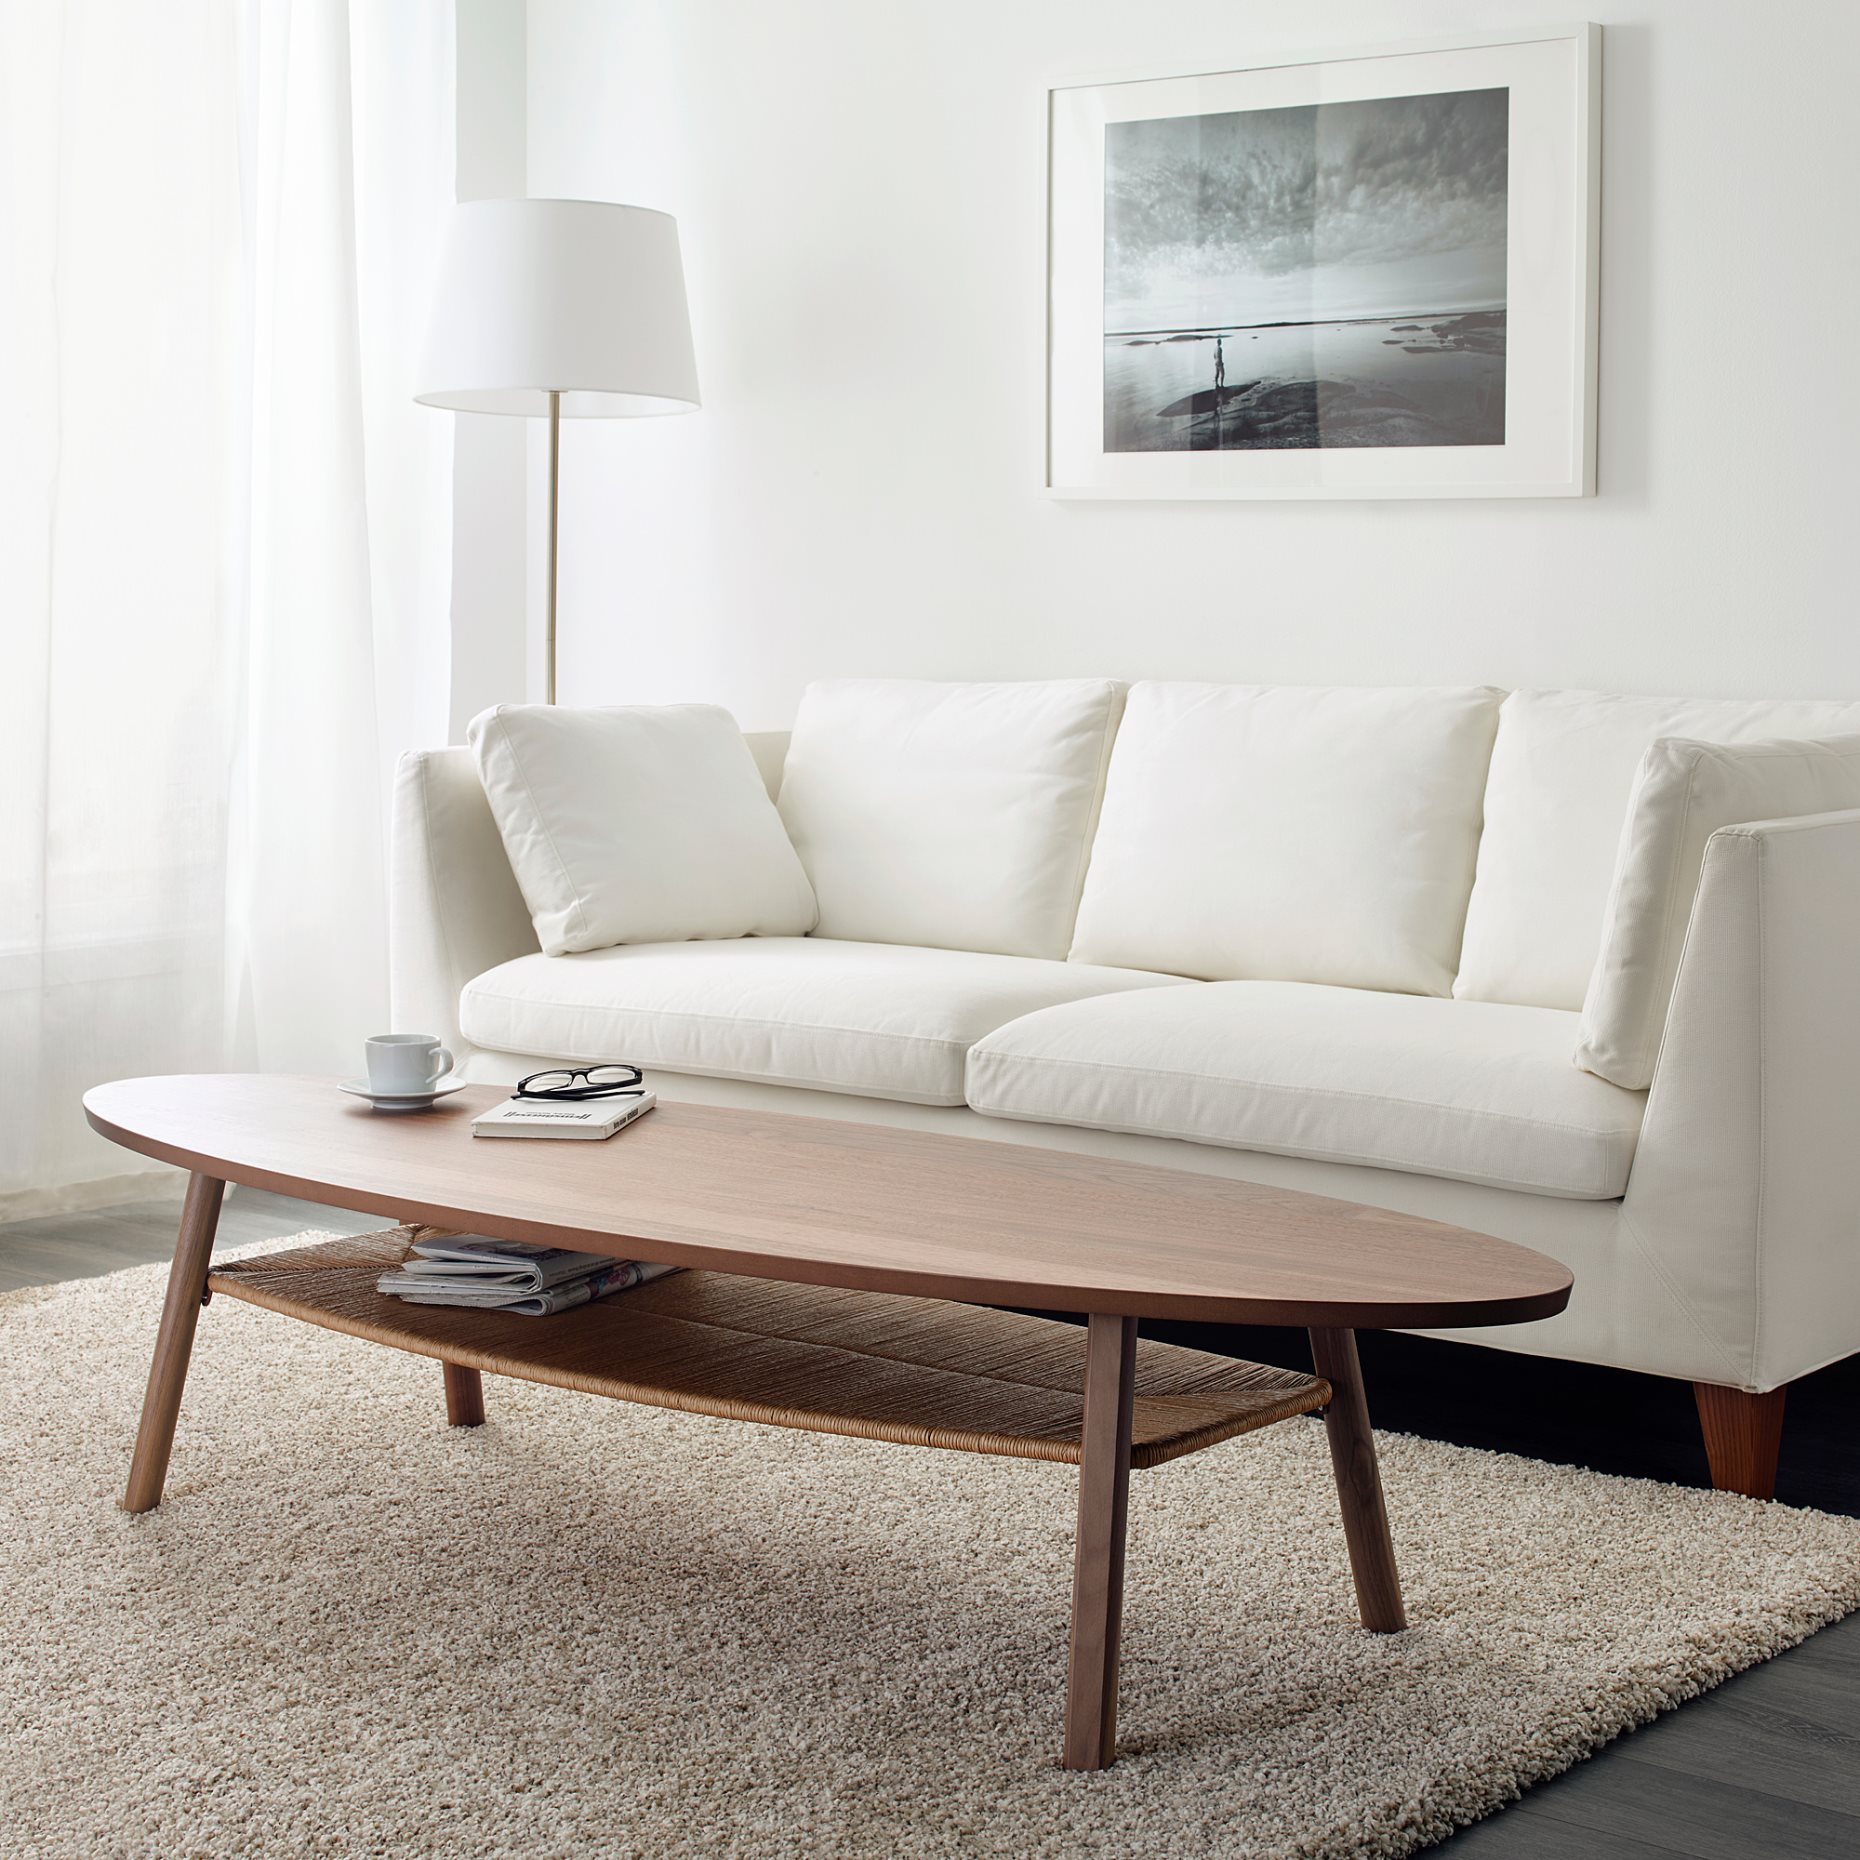 STOCKHOLM, coffee table, 702.397.10